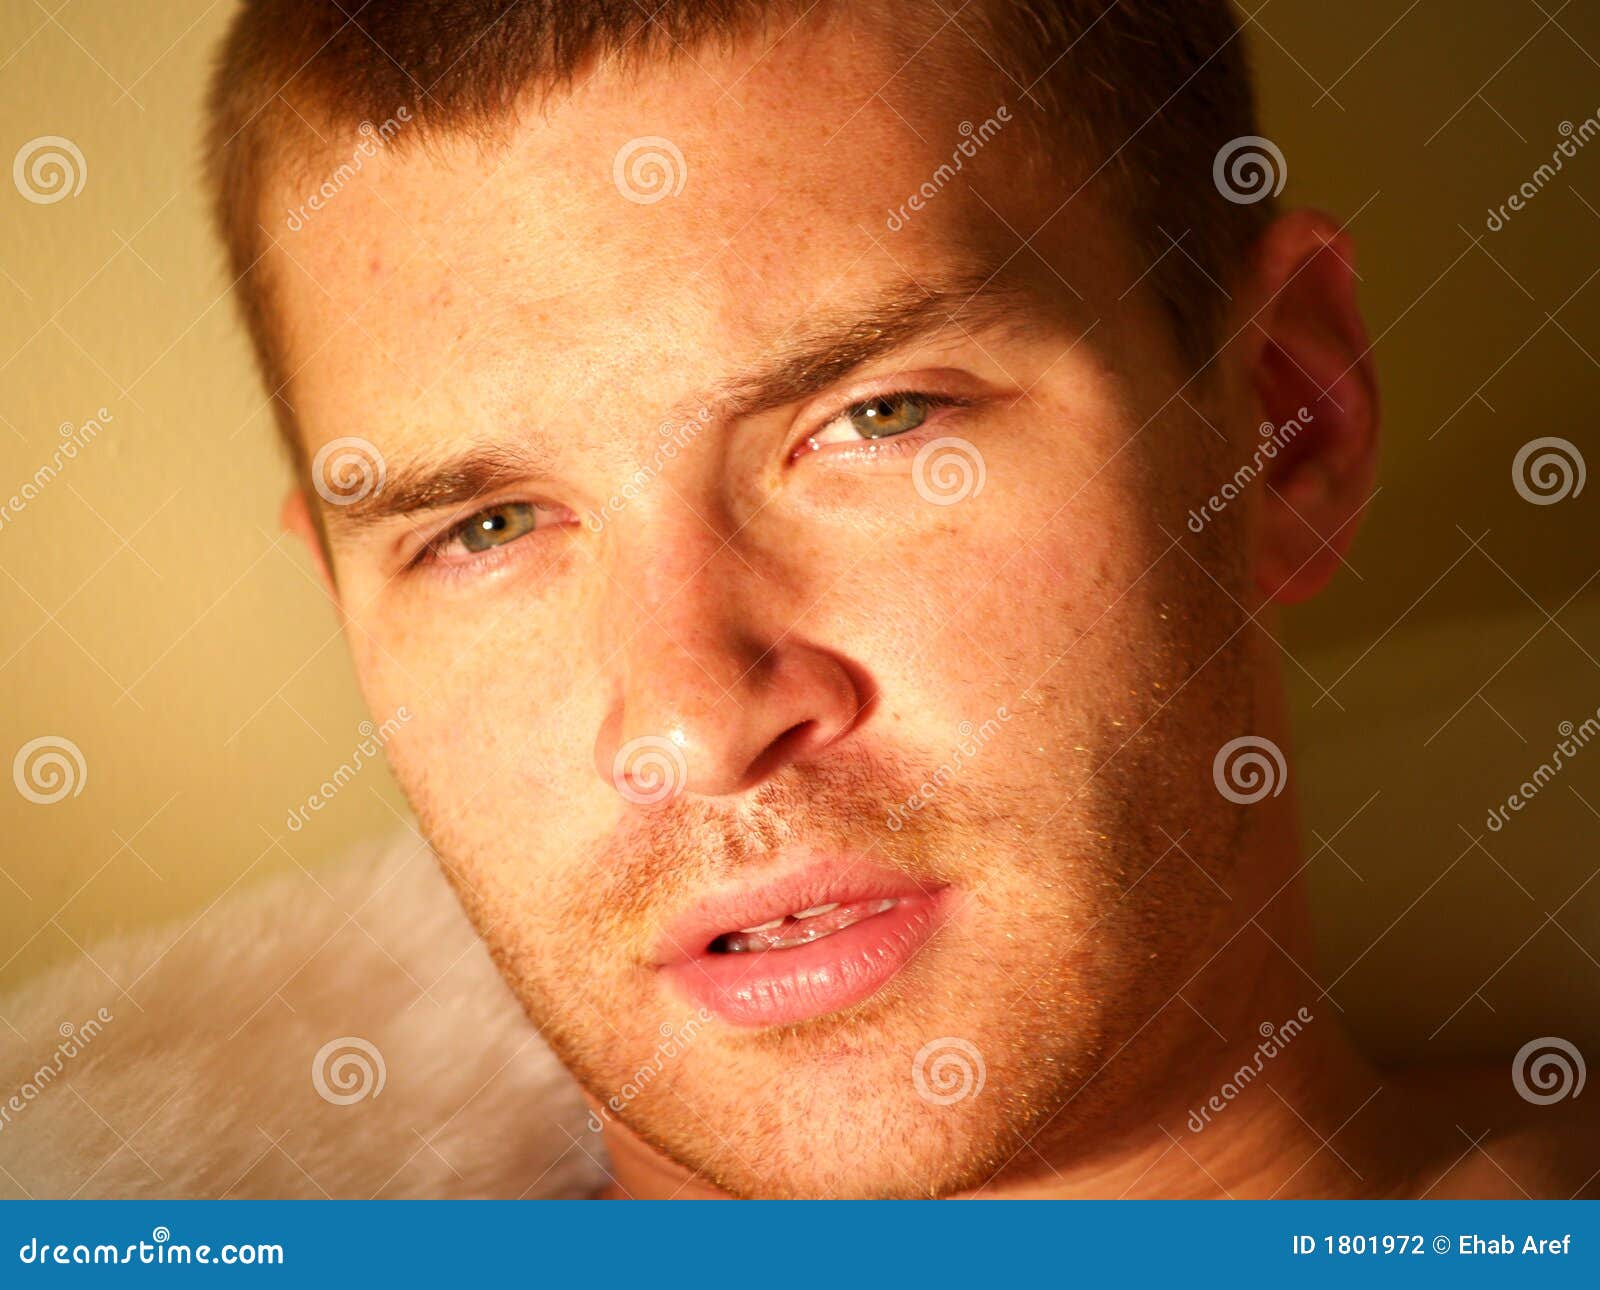 Cute male face stock photo. Image of pillow, background - 1801972